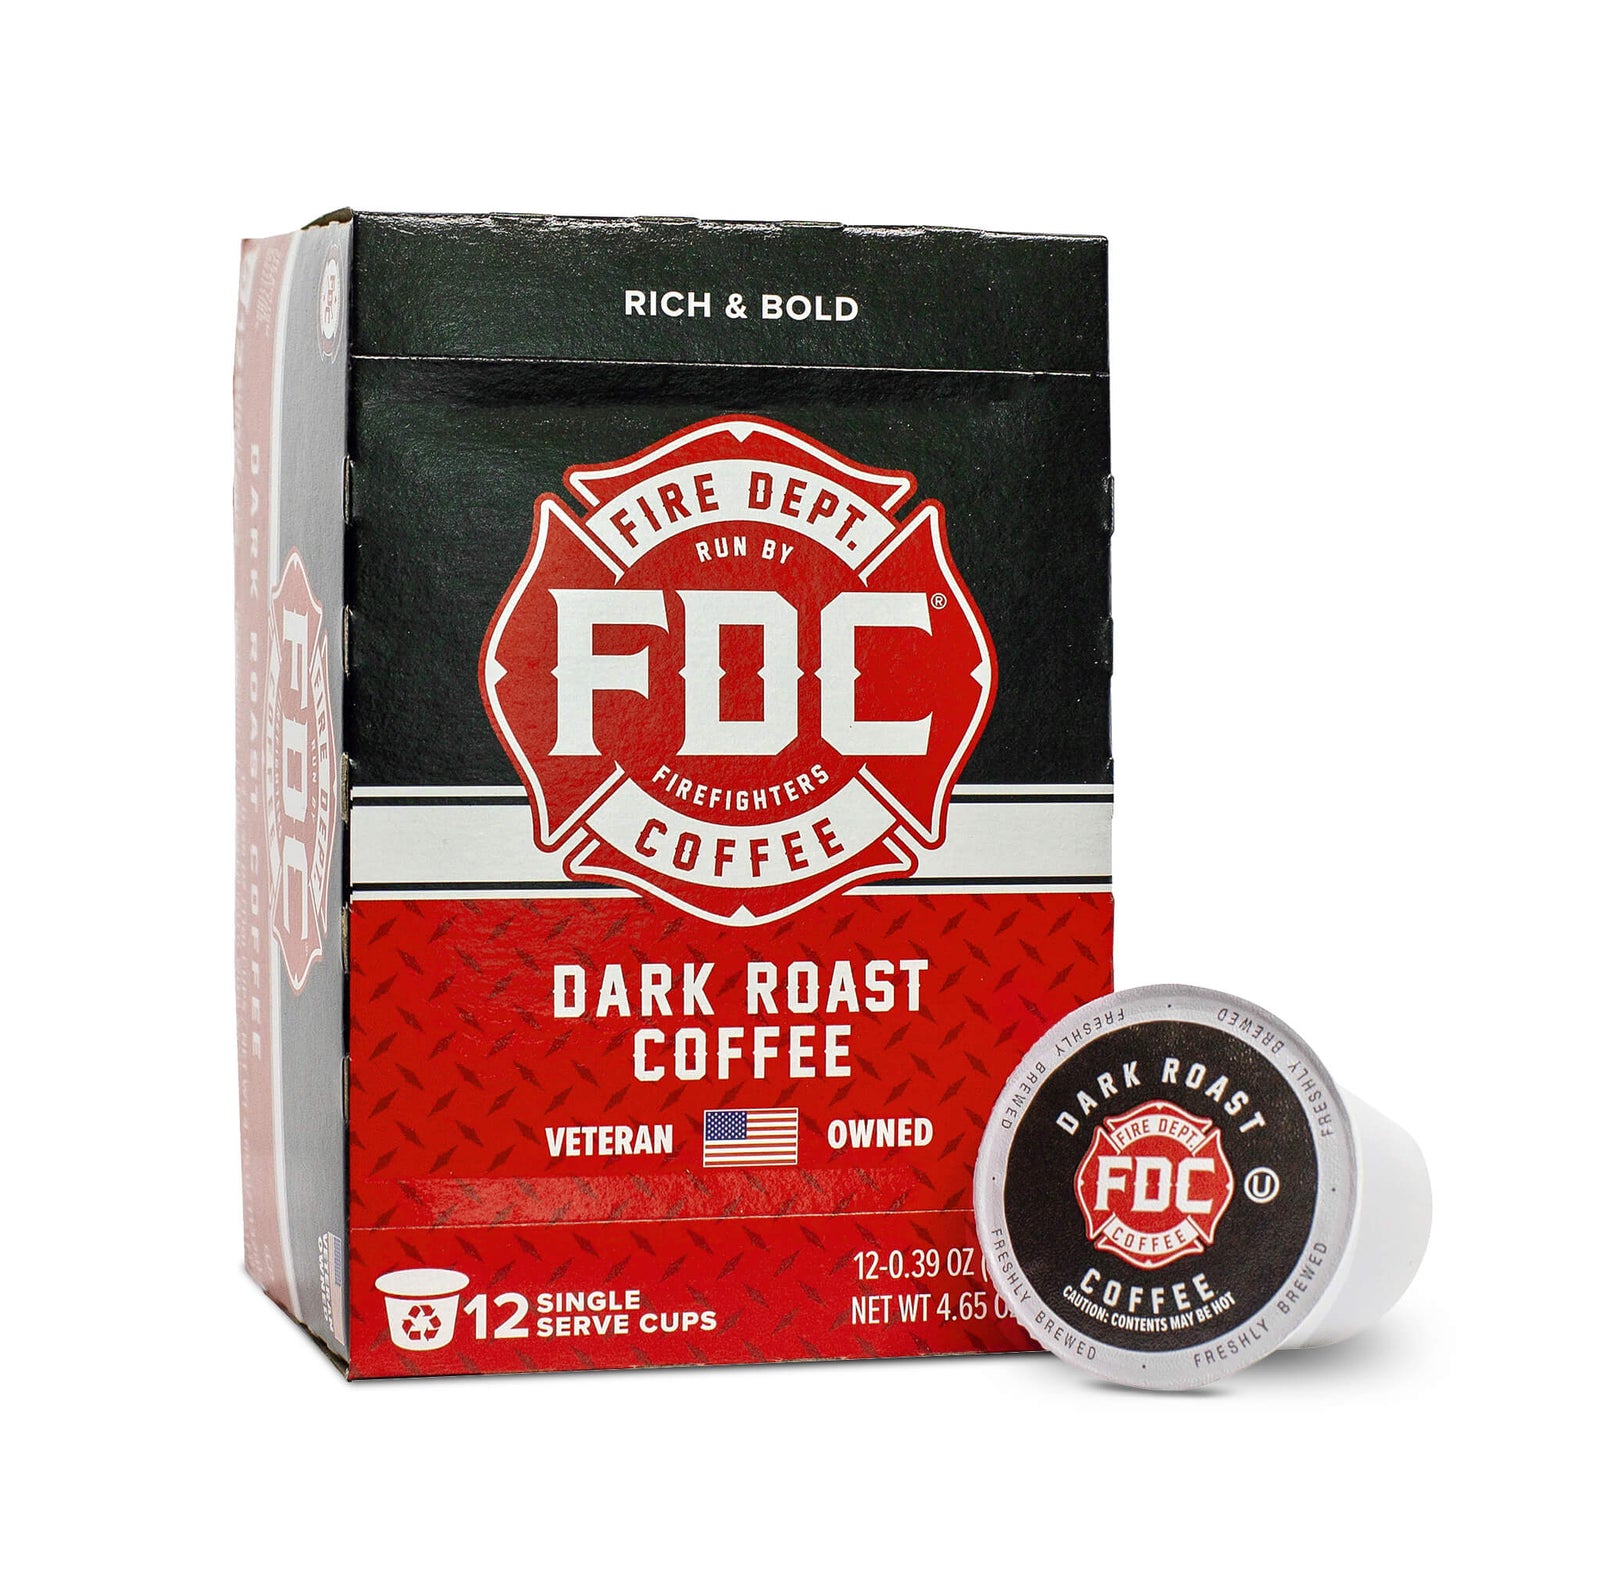 A 12 count box of Dark Roast Coffee Pods